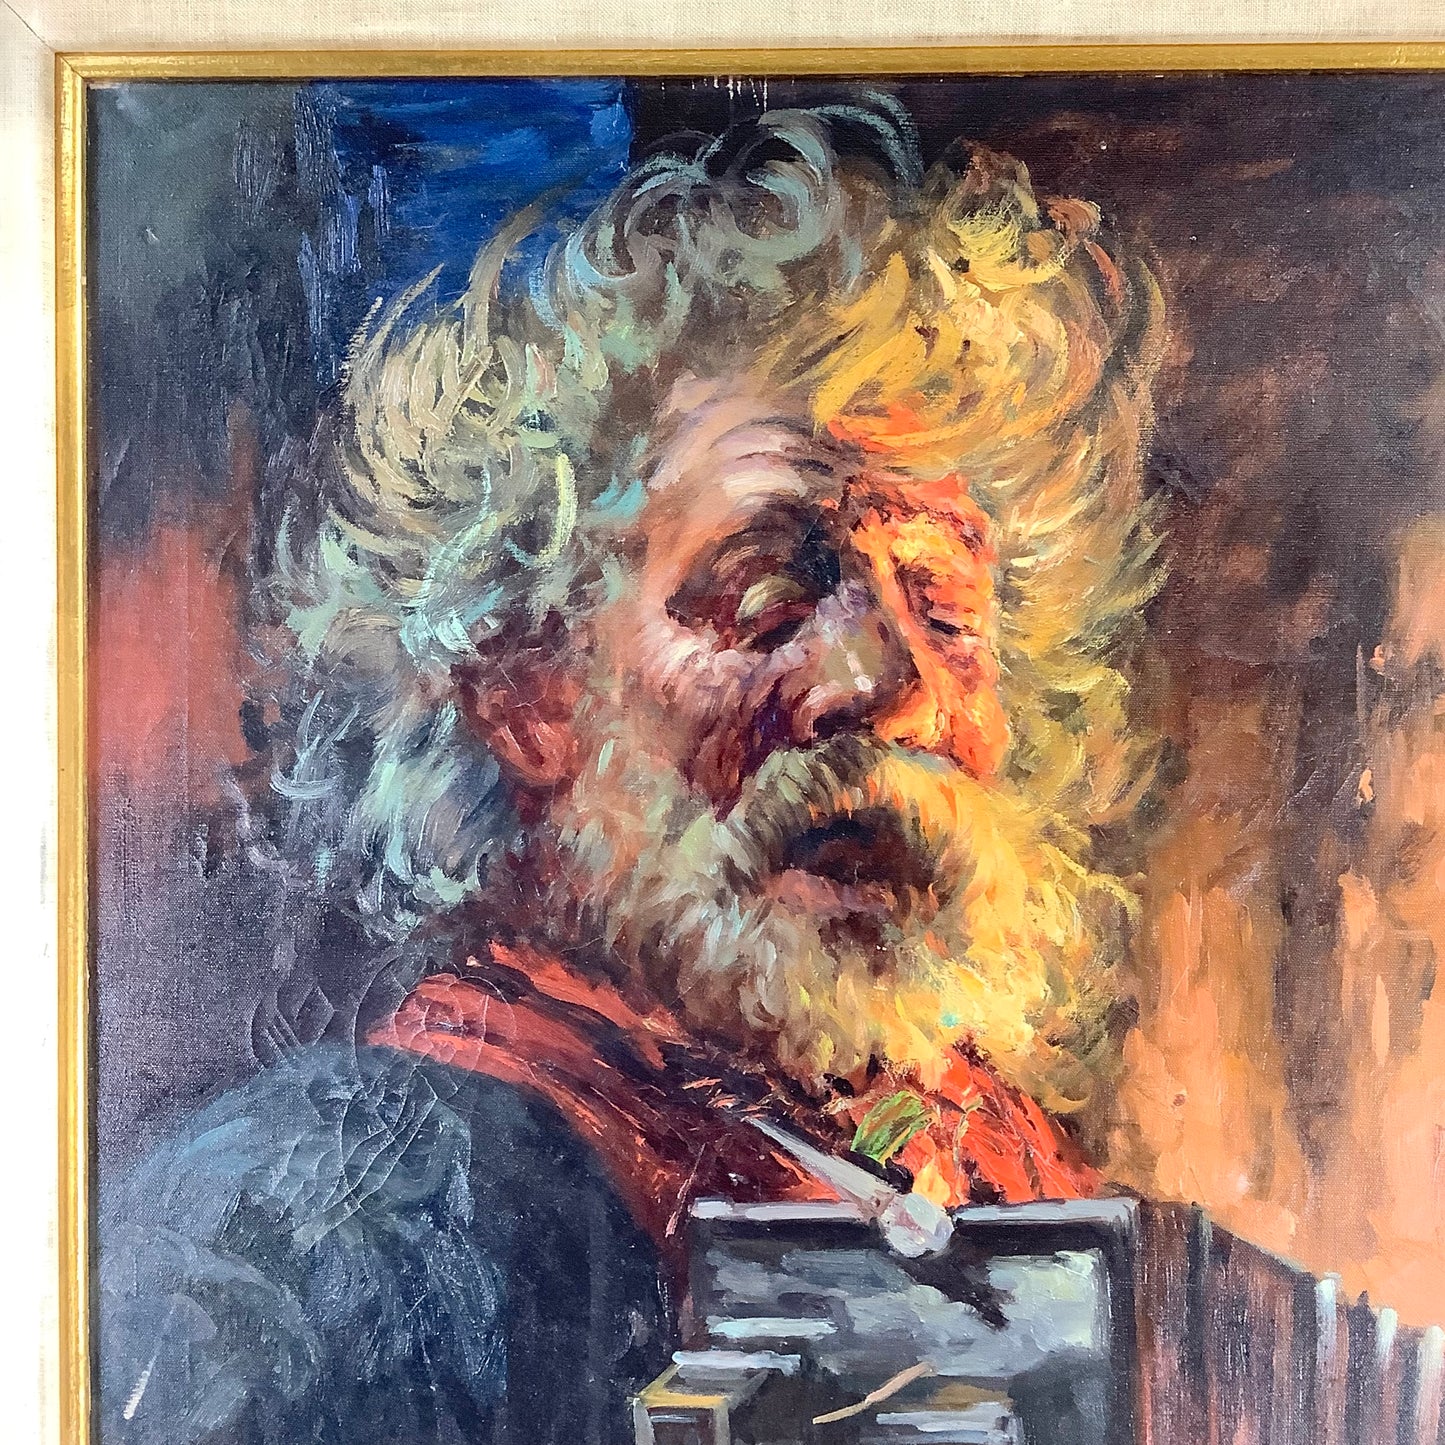 Vintage "Accordion Player" Oil on Canvas Painting Signed G. Madonini